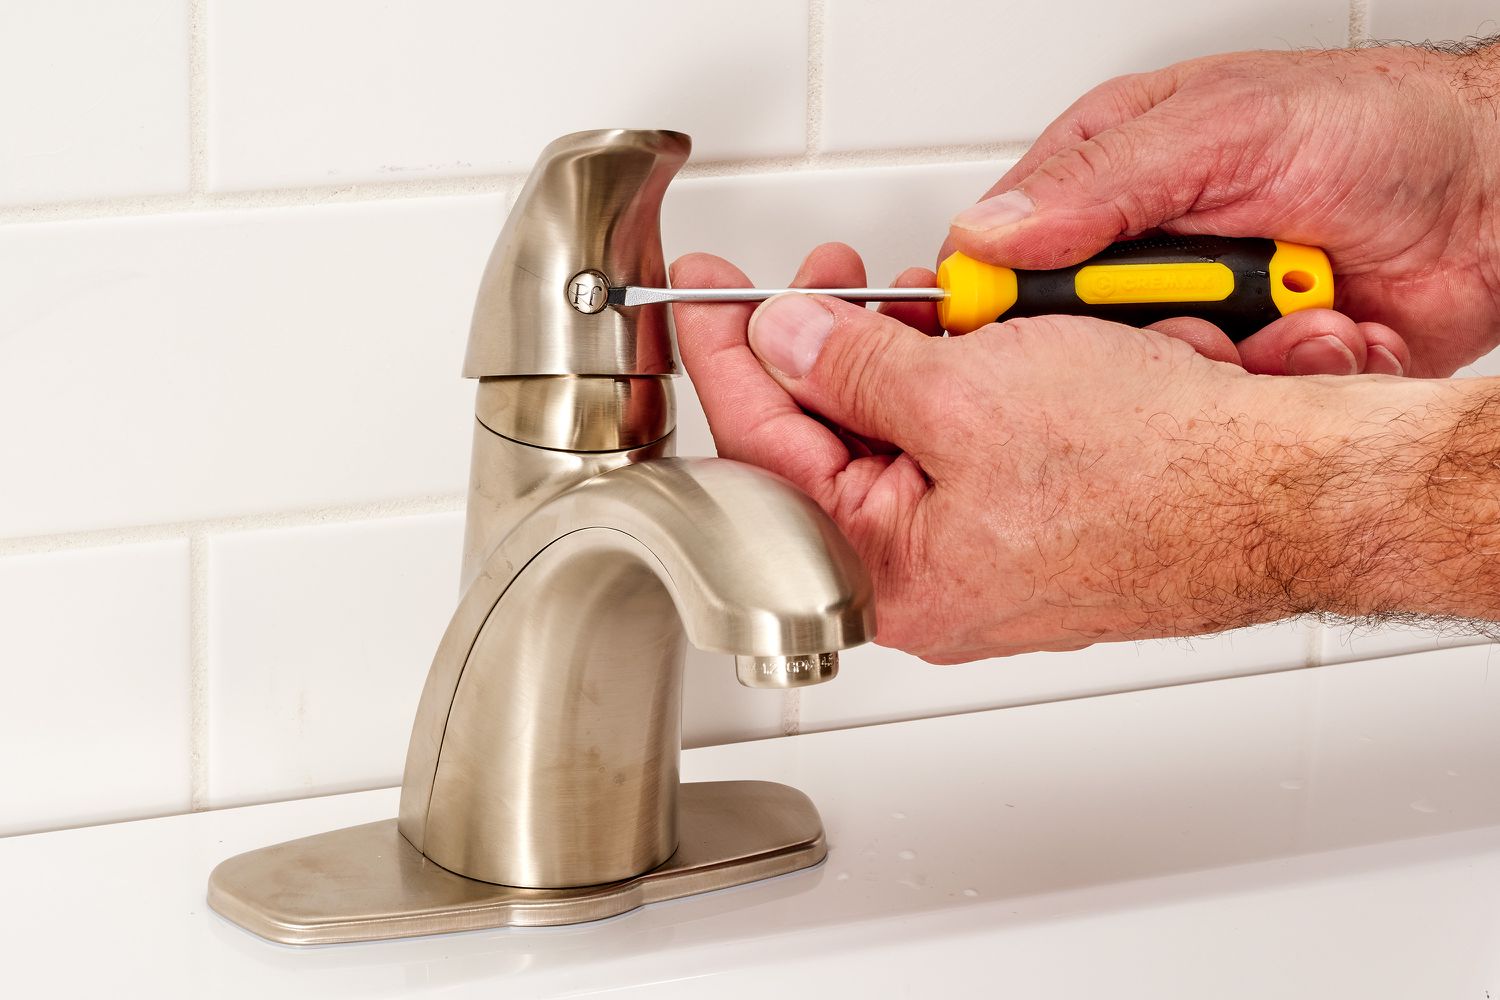 Lever handle removed from faucet with Allen-head screwdriver